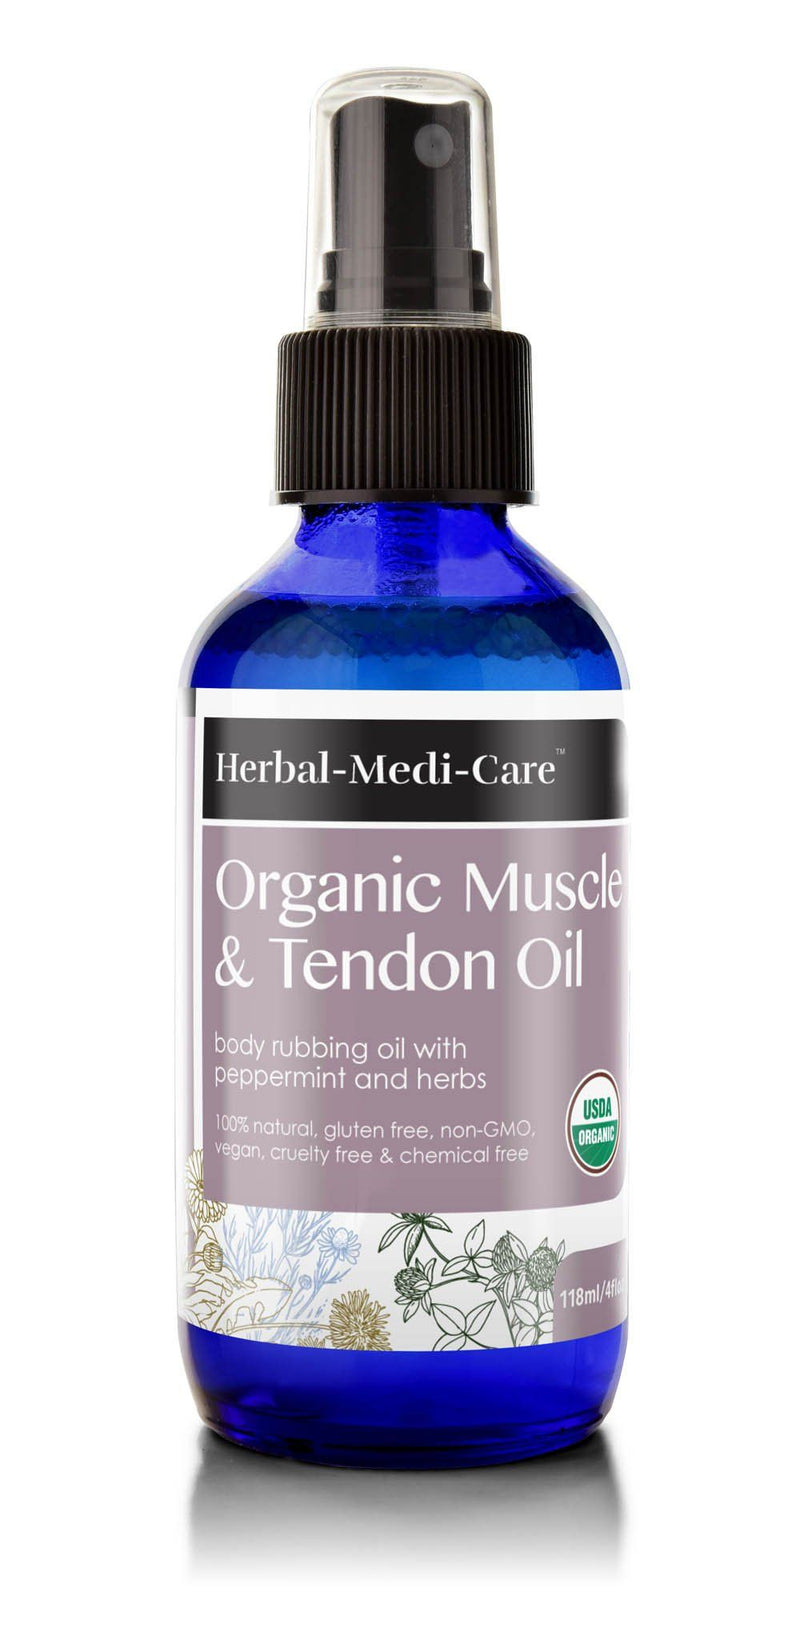 Herbal-Medi-Care Organic Muscle And Tendon (Inflammation And Soreness Relief) Oil; 4floz - Herbal-Medi-Care Organic Muscle And Tendon (Inflammation And Soreness Relief) Oil; 4floz - Herbal-Medi-Care Organic Muscle And Tendon (Inflammation And Soreness Relief) Oil; 4floz